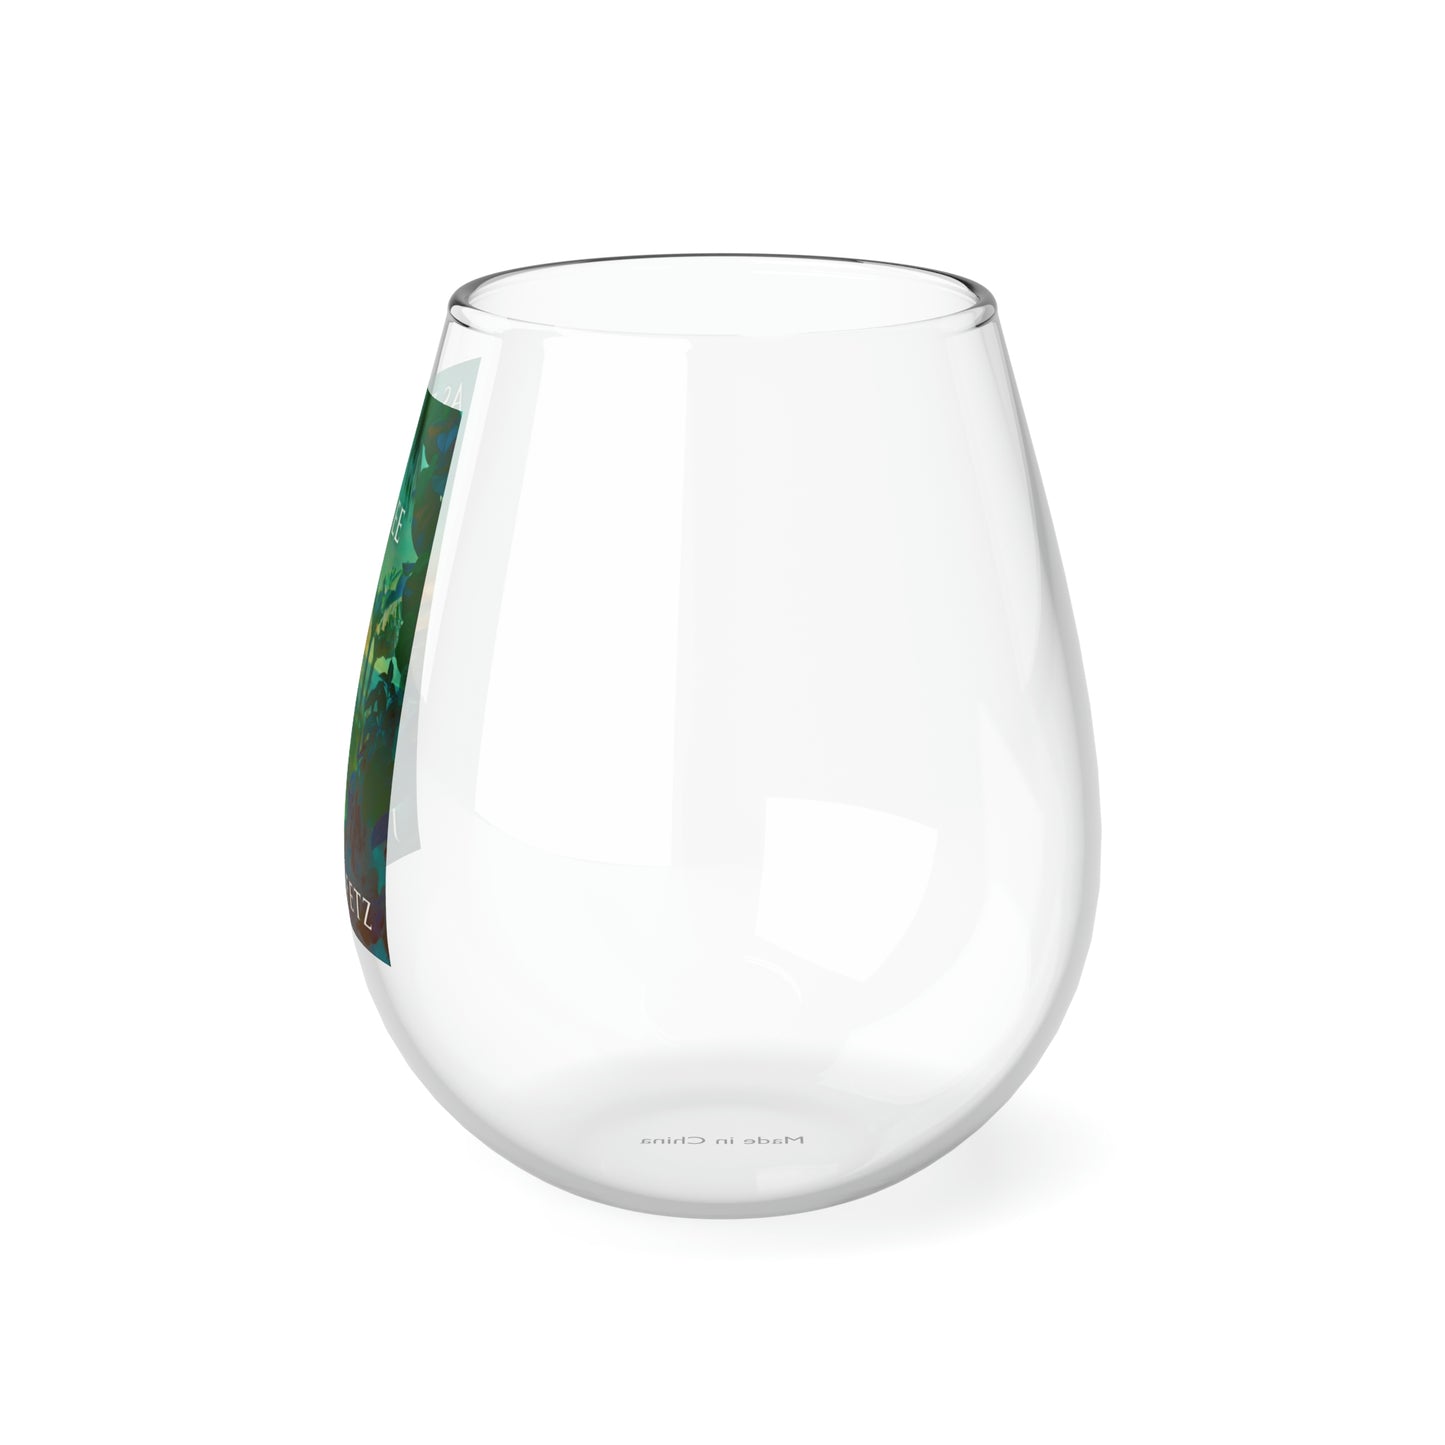 As Far As The I Can See - Stemless Wine Glass, 11.75oz